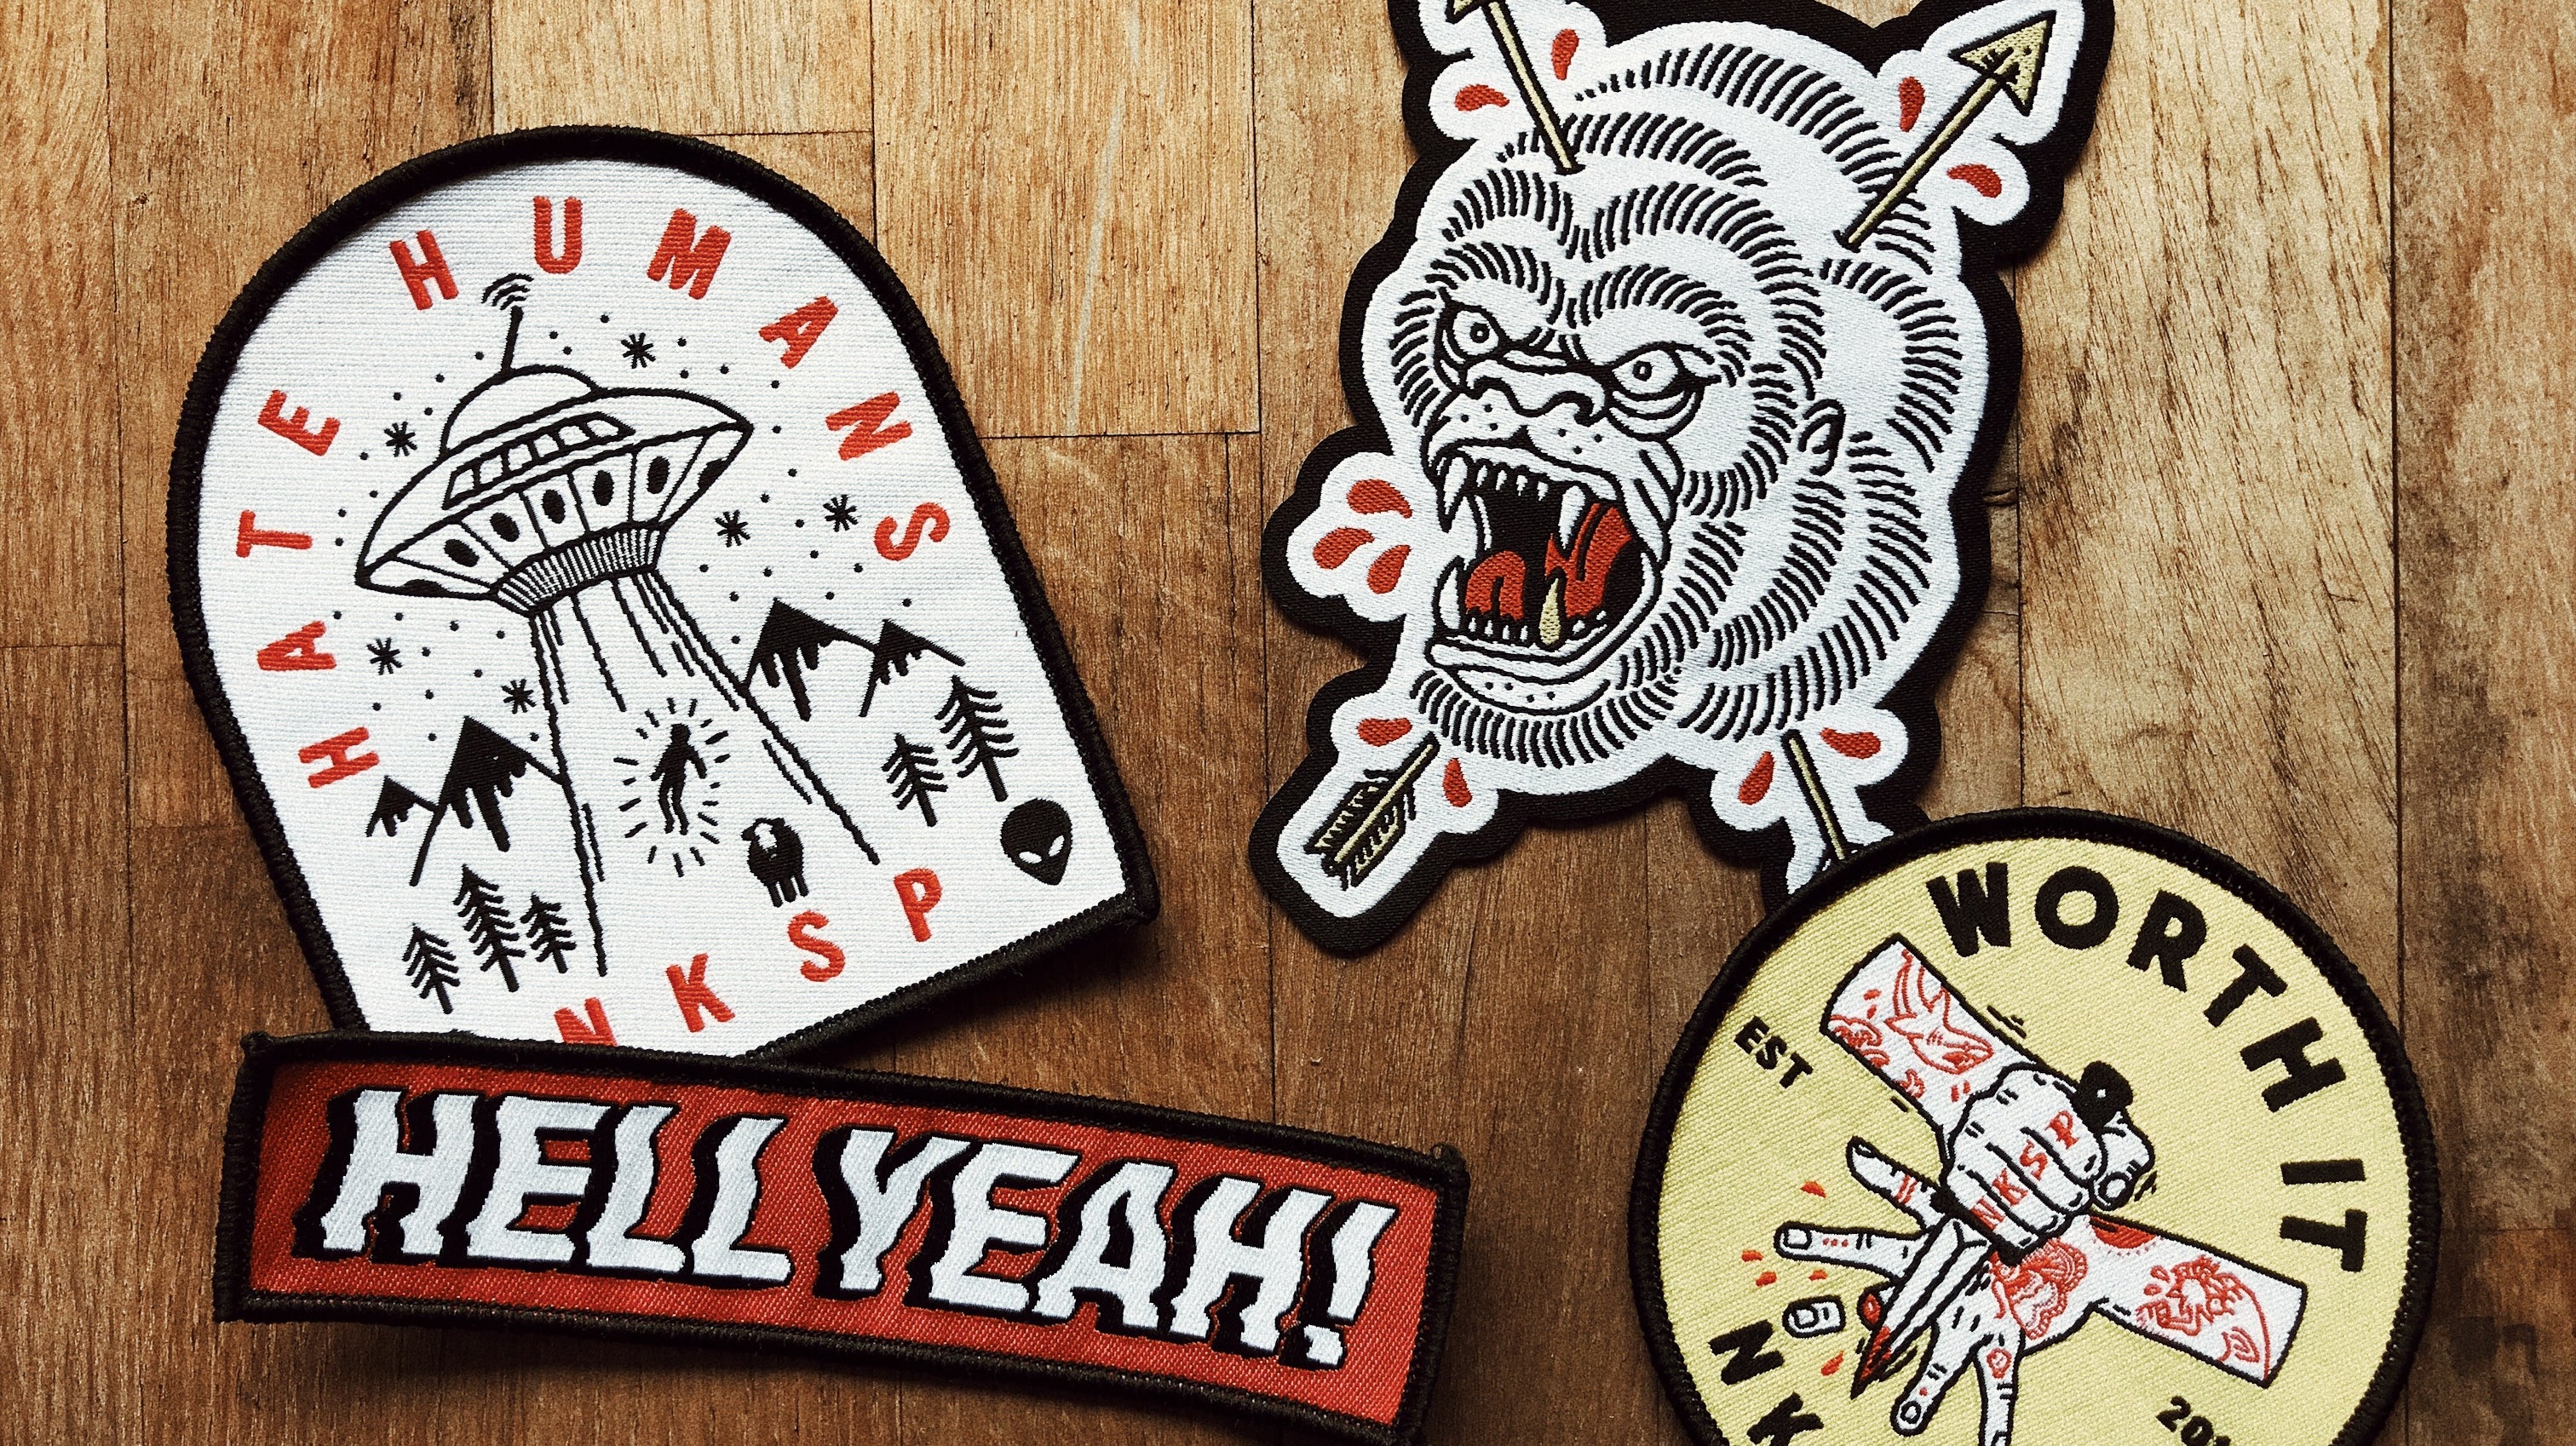 FREE PATCHES WITH EVERY ODER